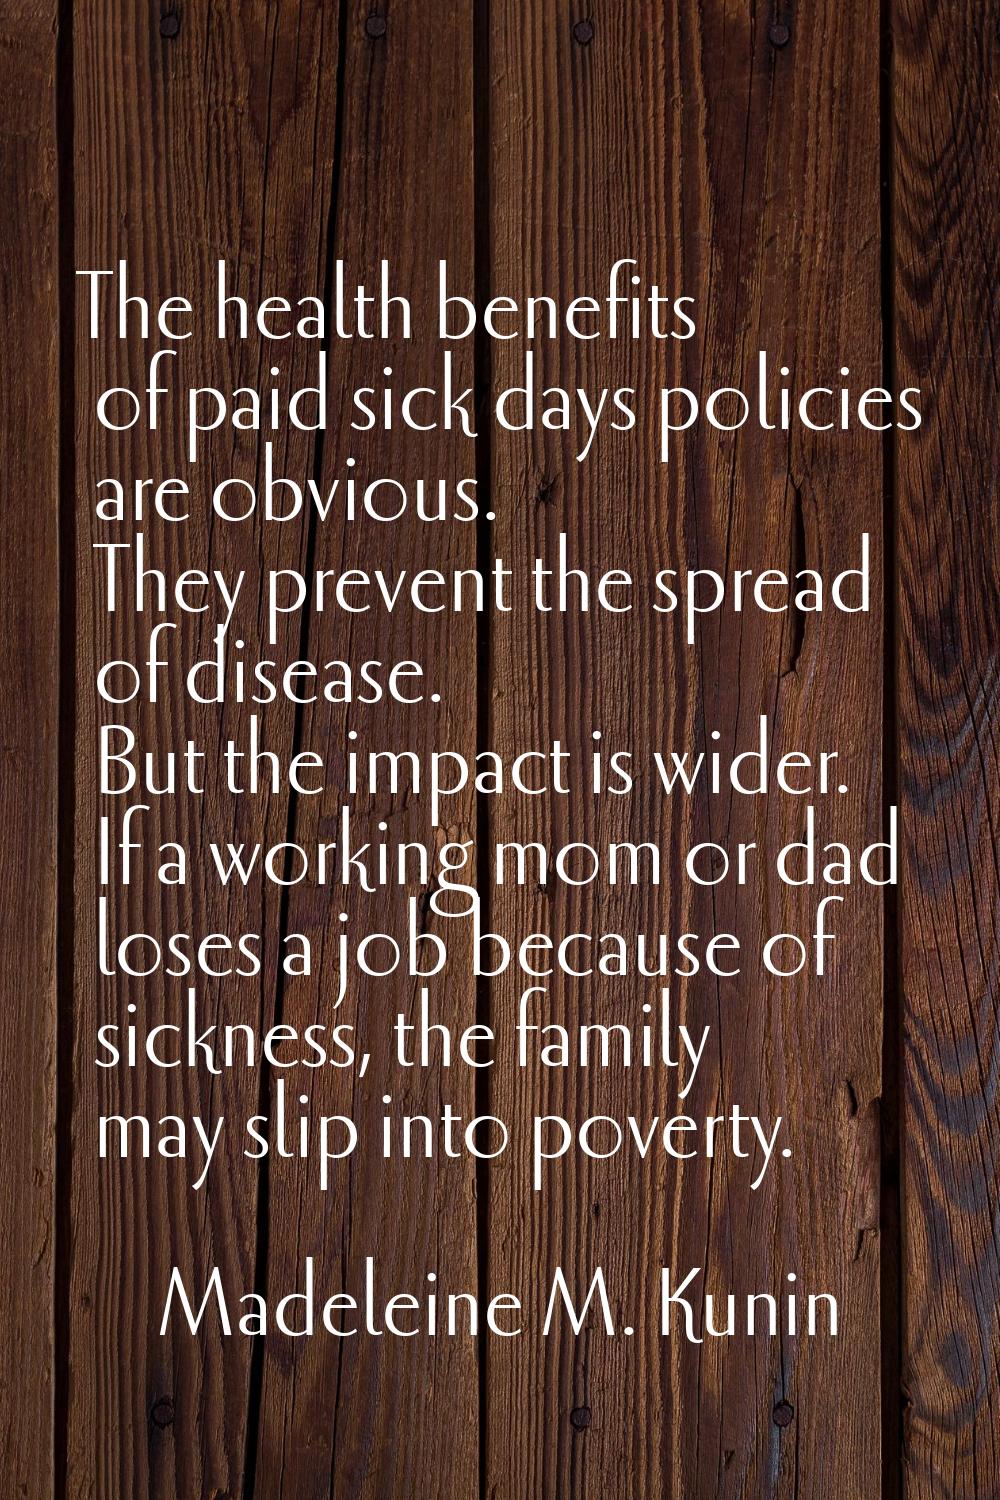 The health benefits of paid sick days policies are obvious. They prevent the spread of disease. But